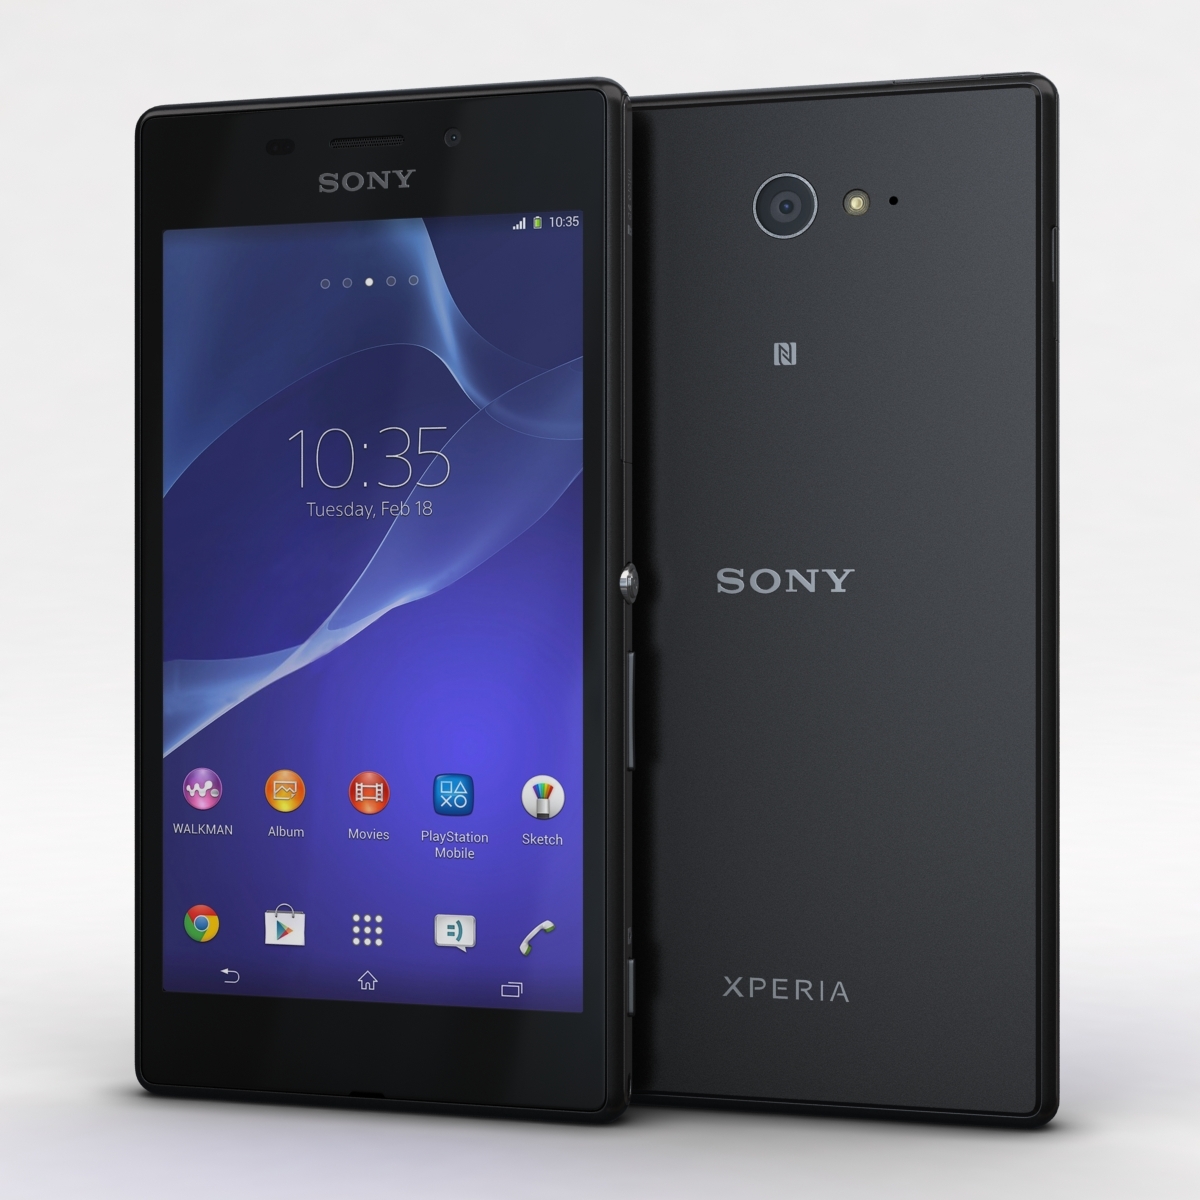 How To Reset Or Bypass Google Account (FRP) On SONY Xperia M2 Aqua D2403.